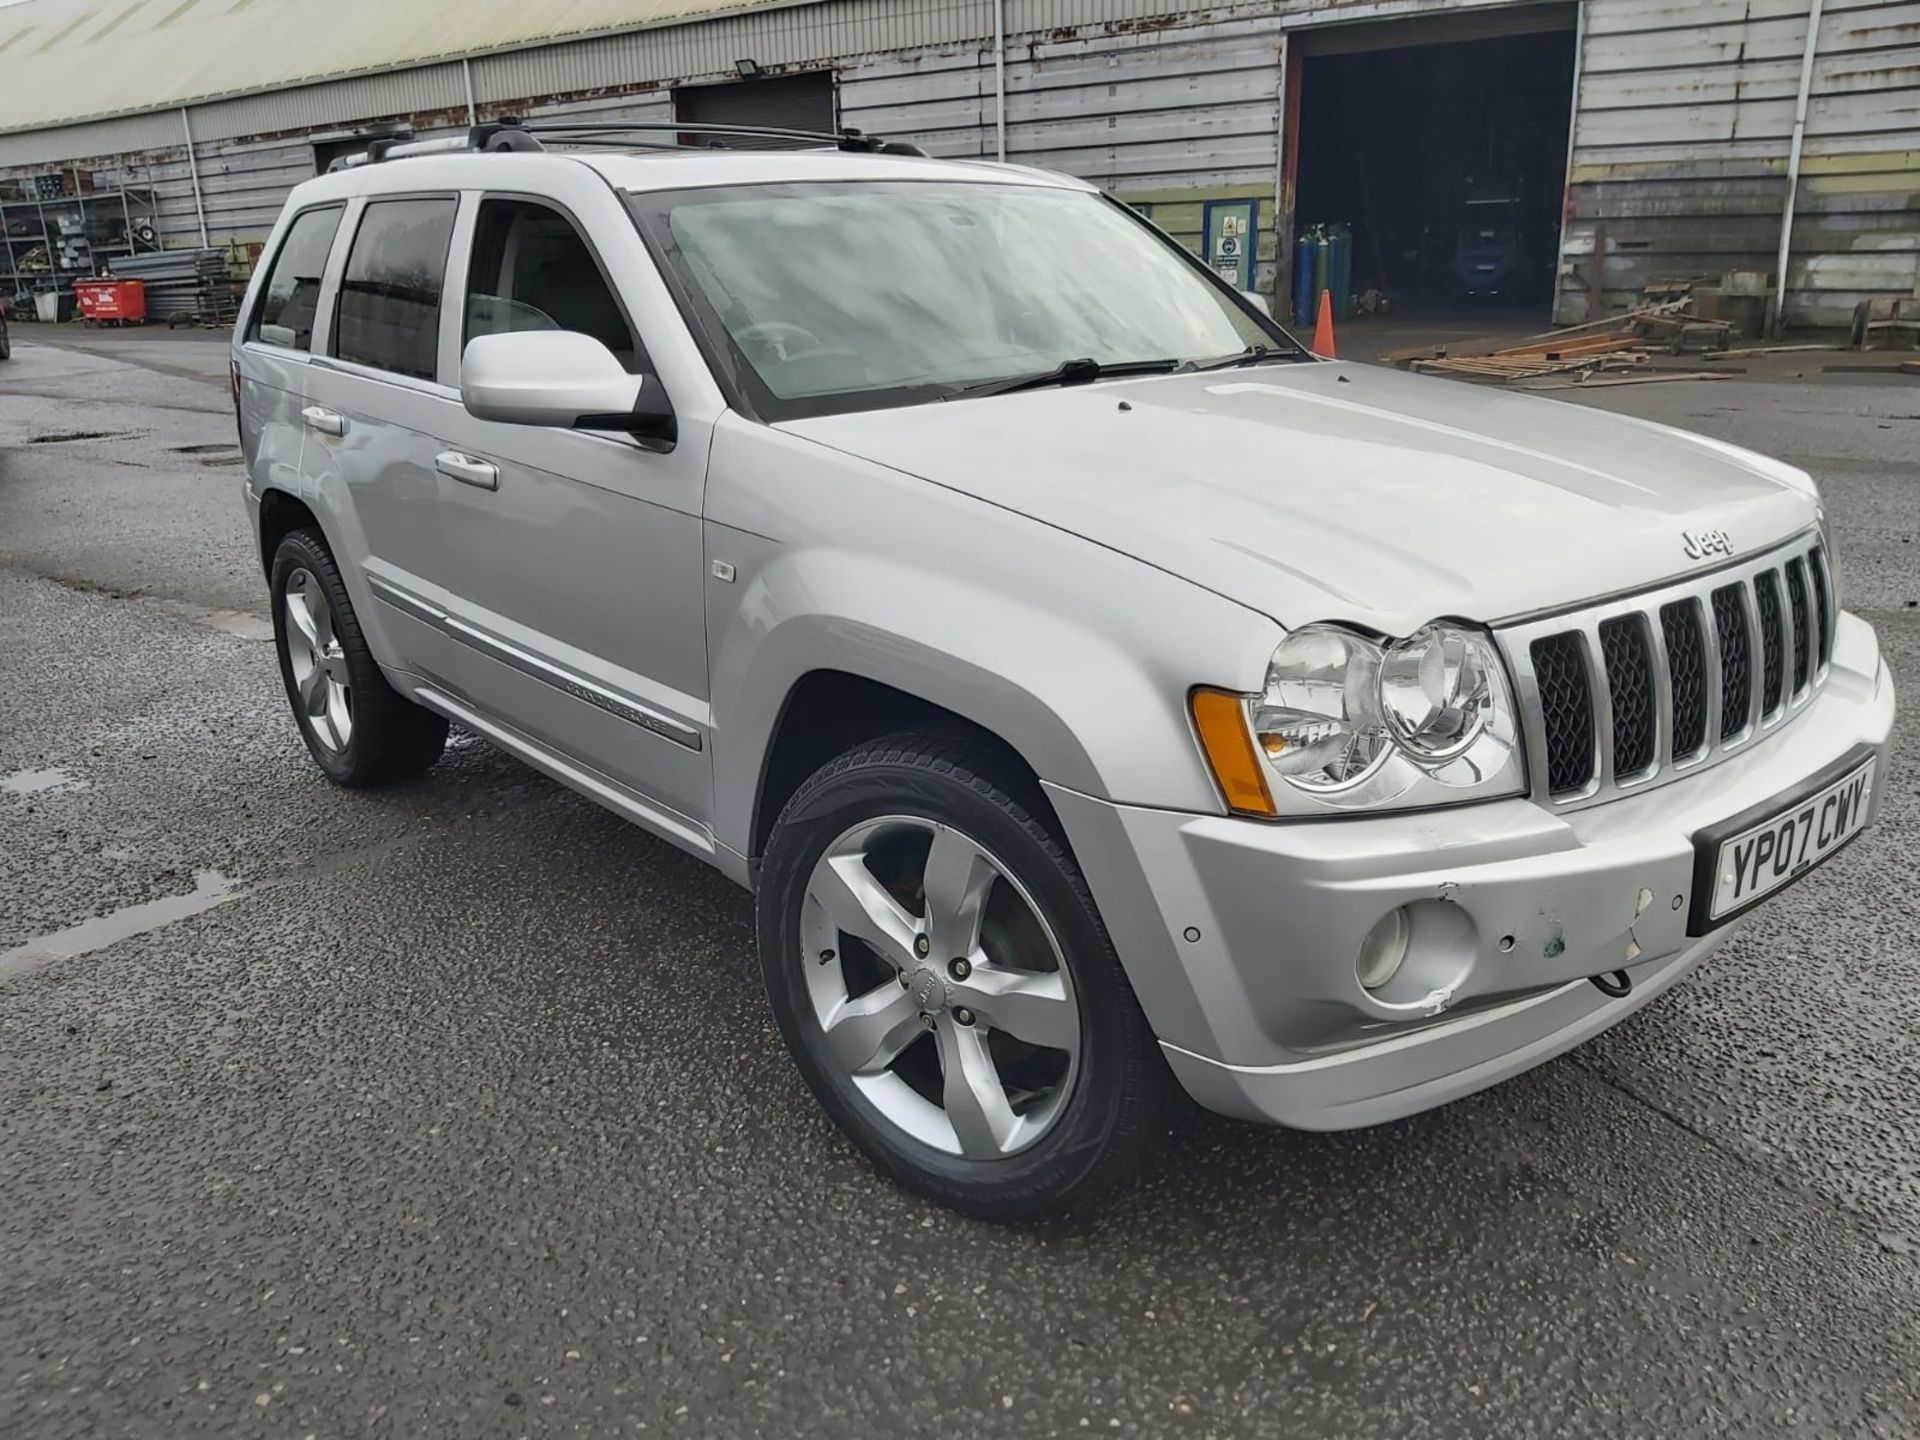 2007 JEEP G-CHEROKEE OVERLAND CRD A SILVER SUV ESTATE *NO VAT*